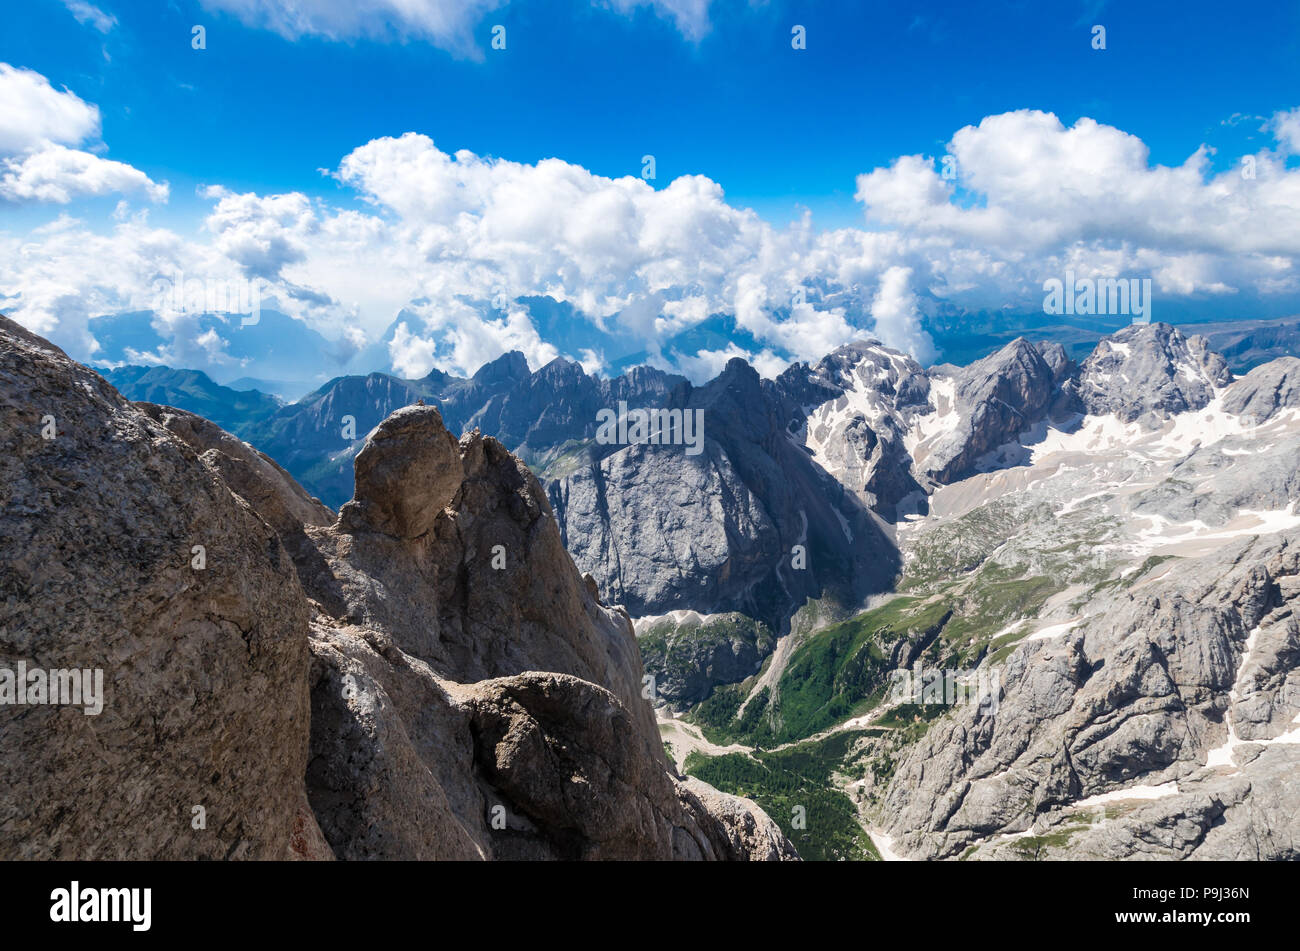 Marmolada massif, Dolomiti, Itay. Spectacular view over the Punta Rocca and other peaks in Dolomites mountains Stock Photo